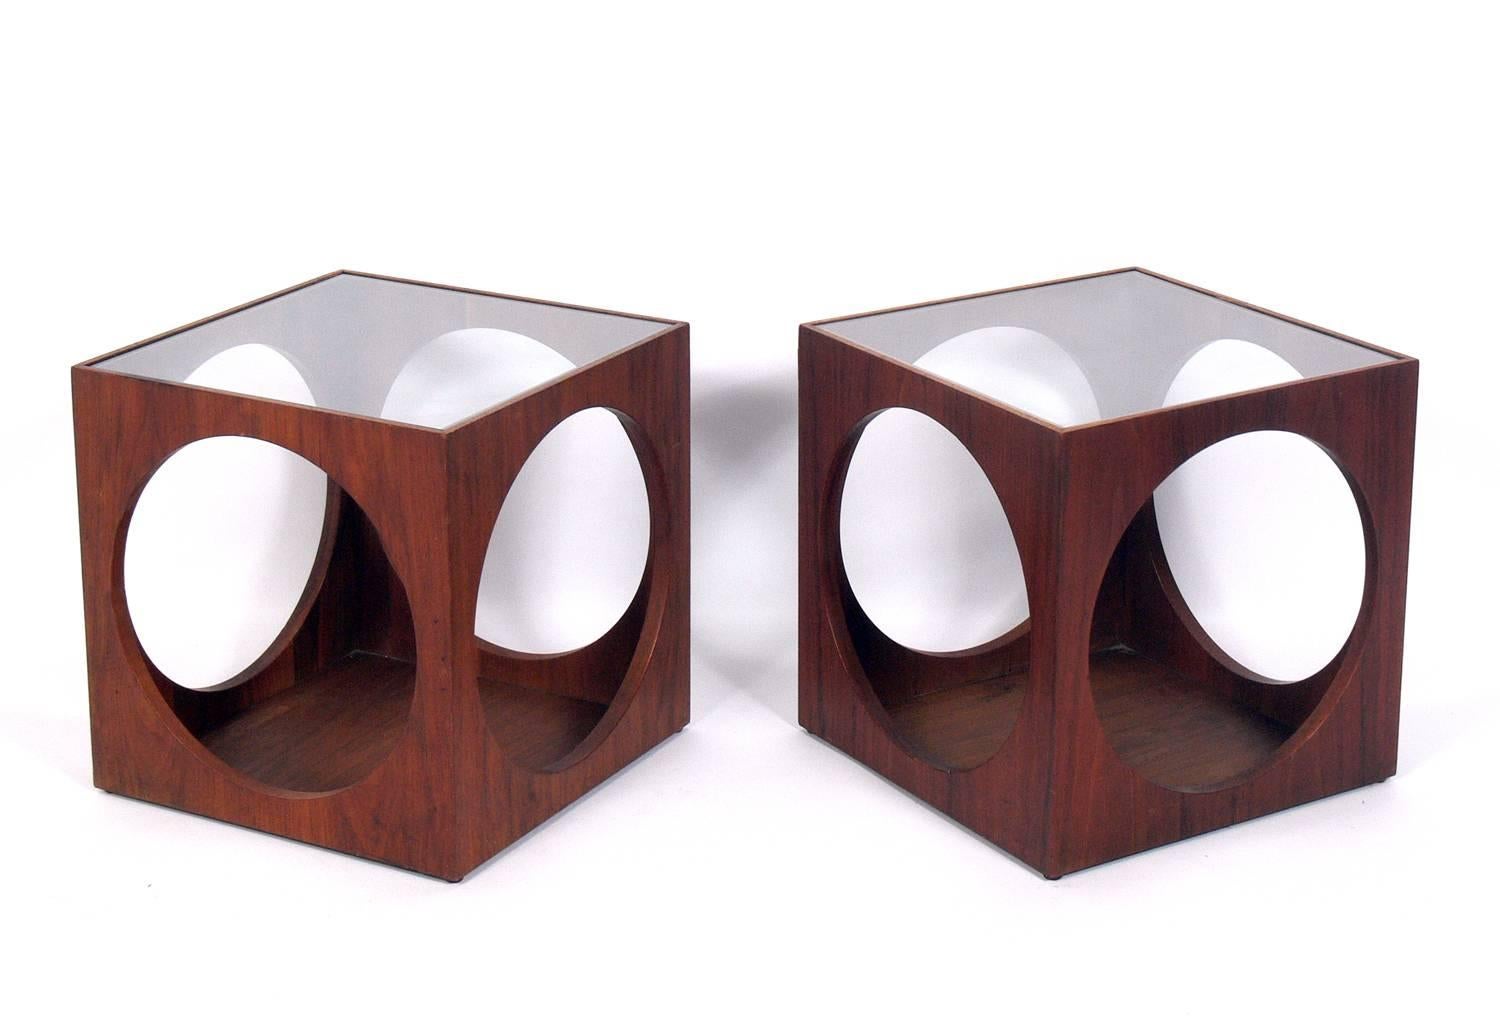 Pair of Mid-Century walnut cube tables, American, circa 1960s. They are a versatile size and can be used as side or end tables, or as nightstands. These tables are currently being refinished and can be completed in your choice of color. The price